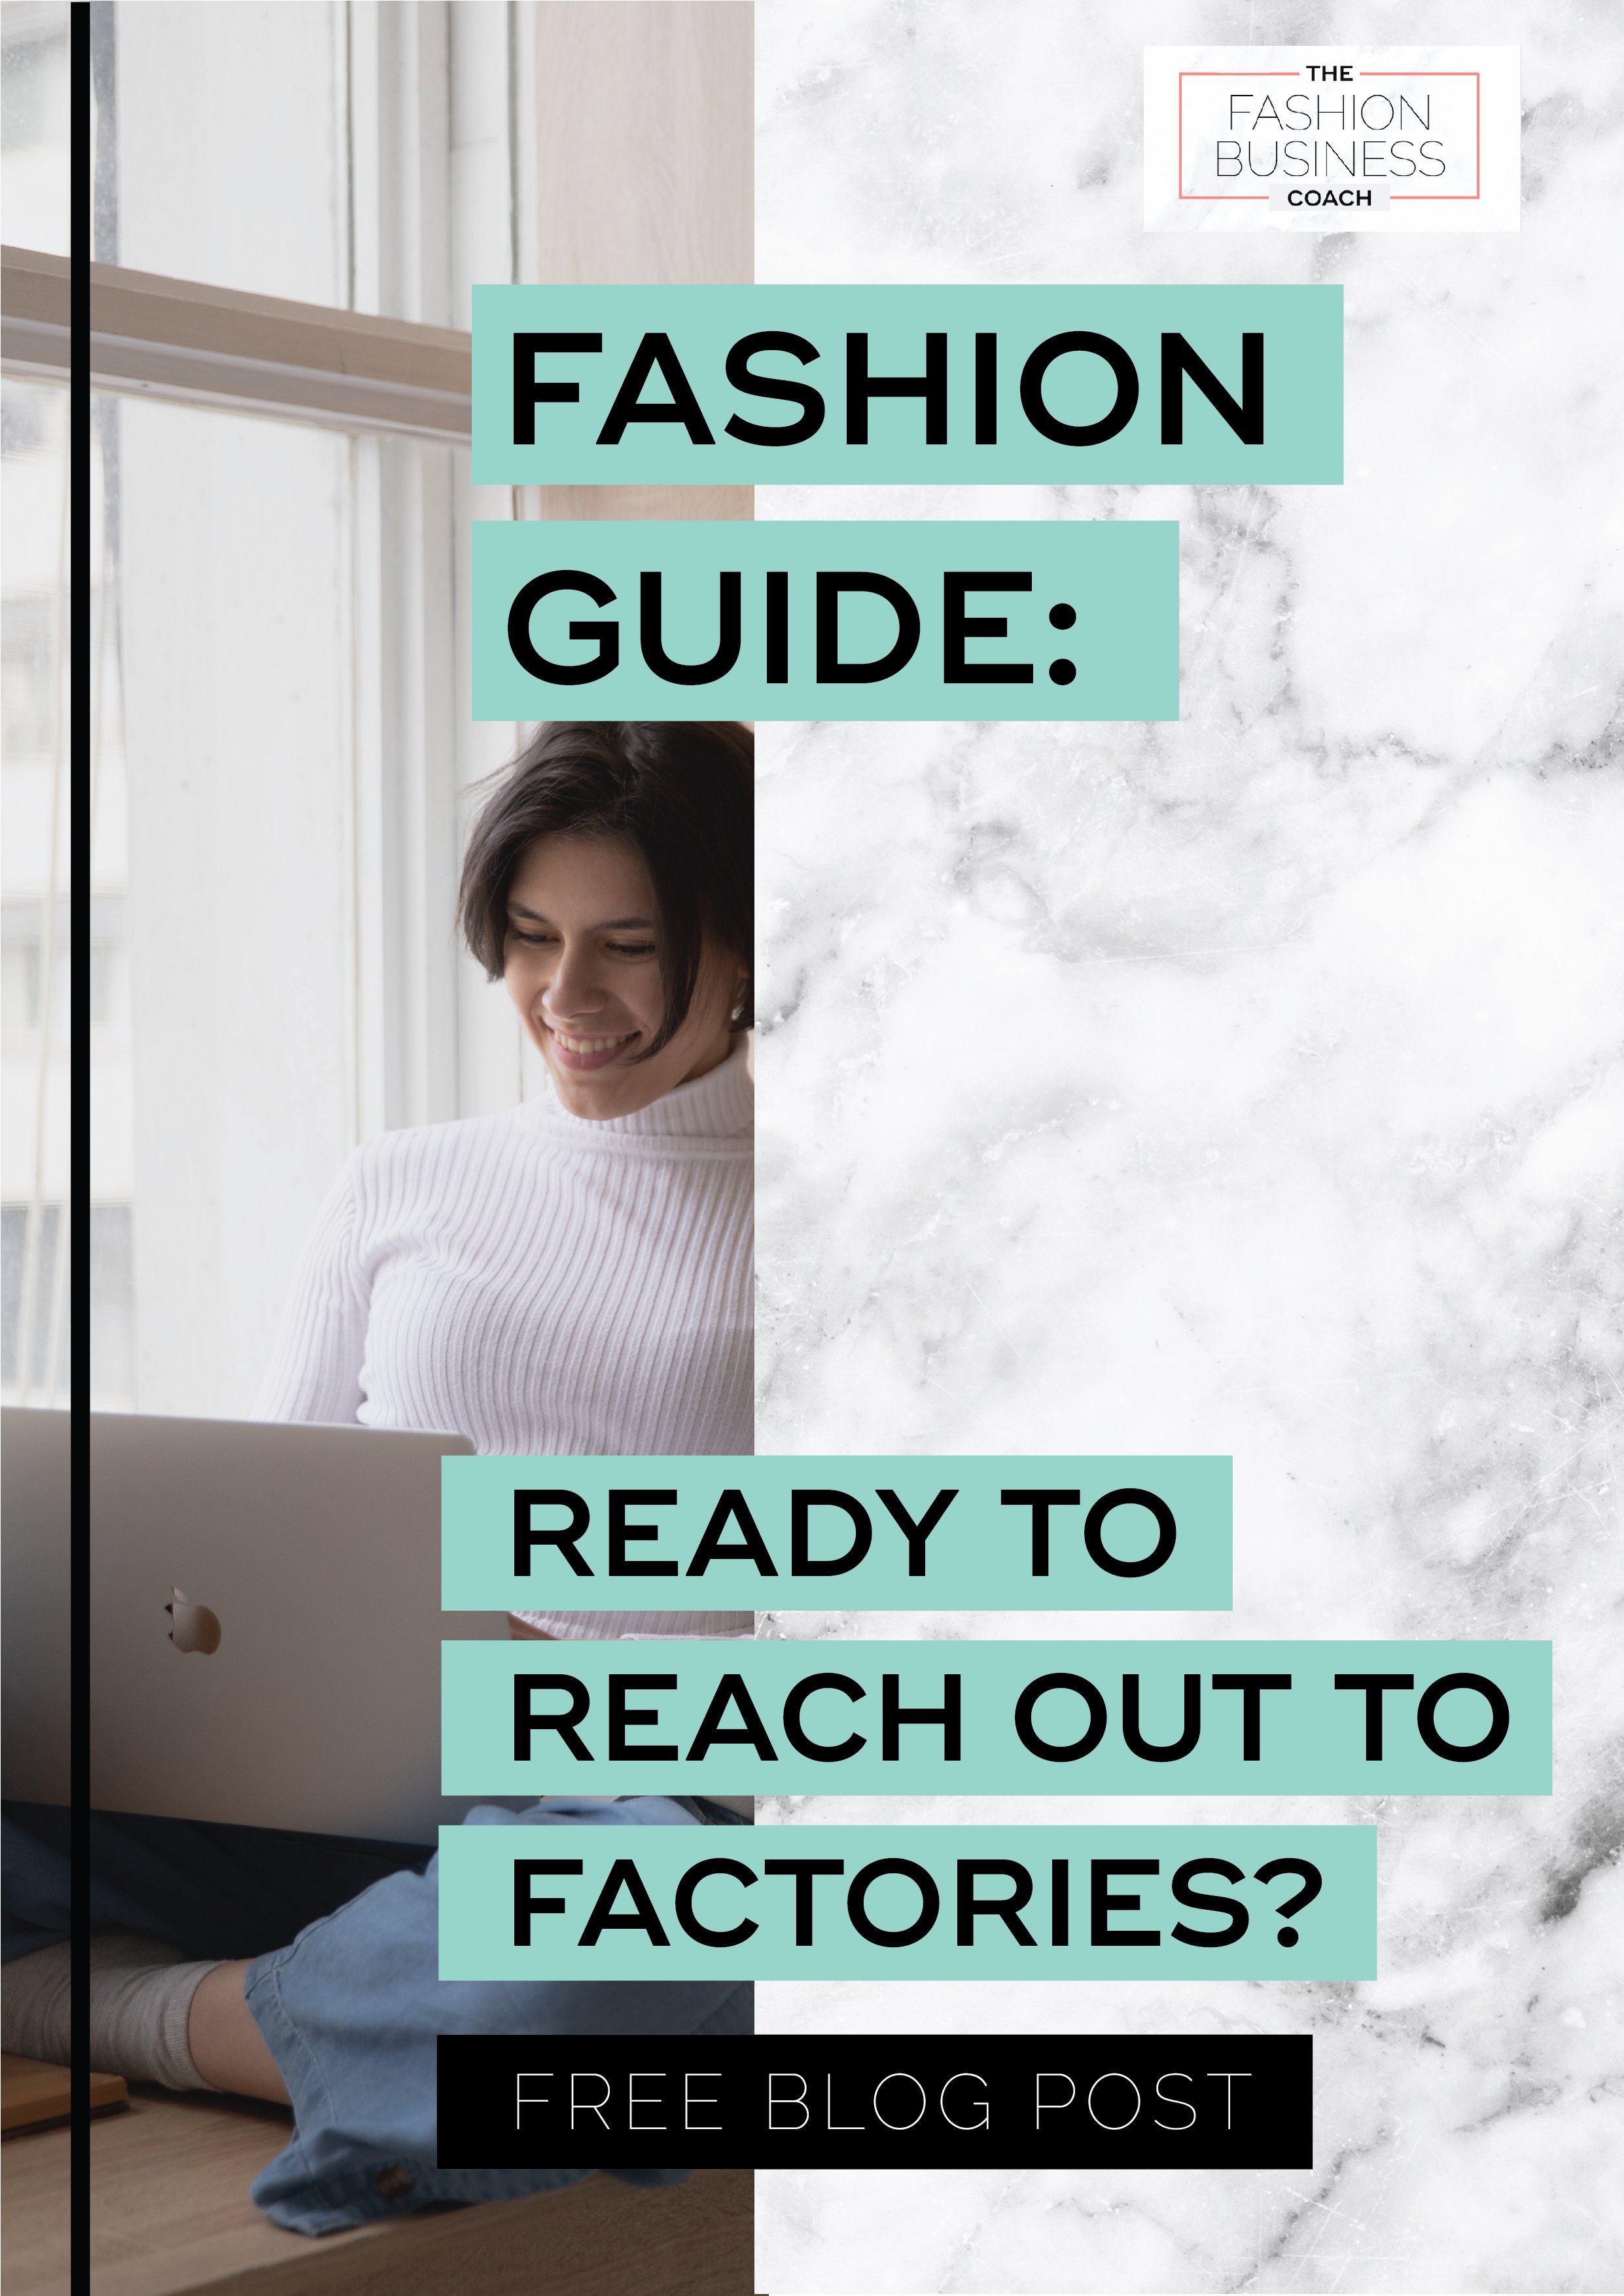 Fashion Guide Ready to Reach Out to Factories 2.jpg